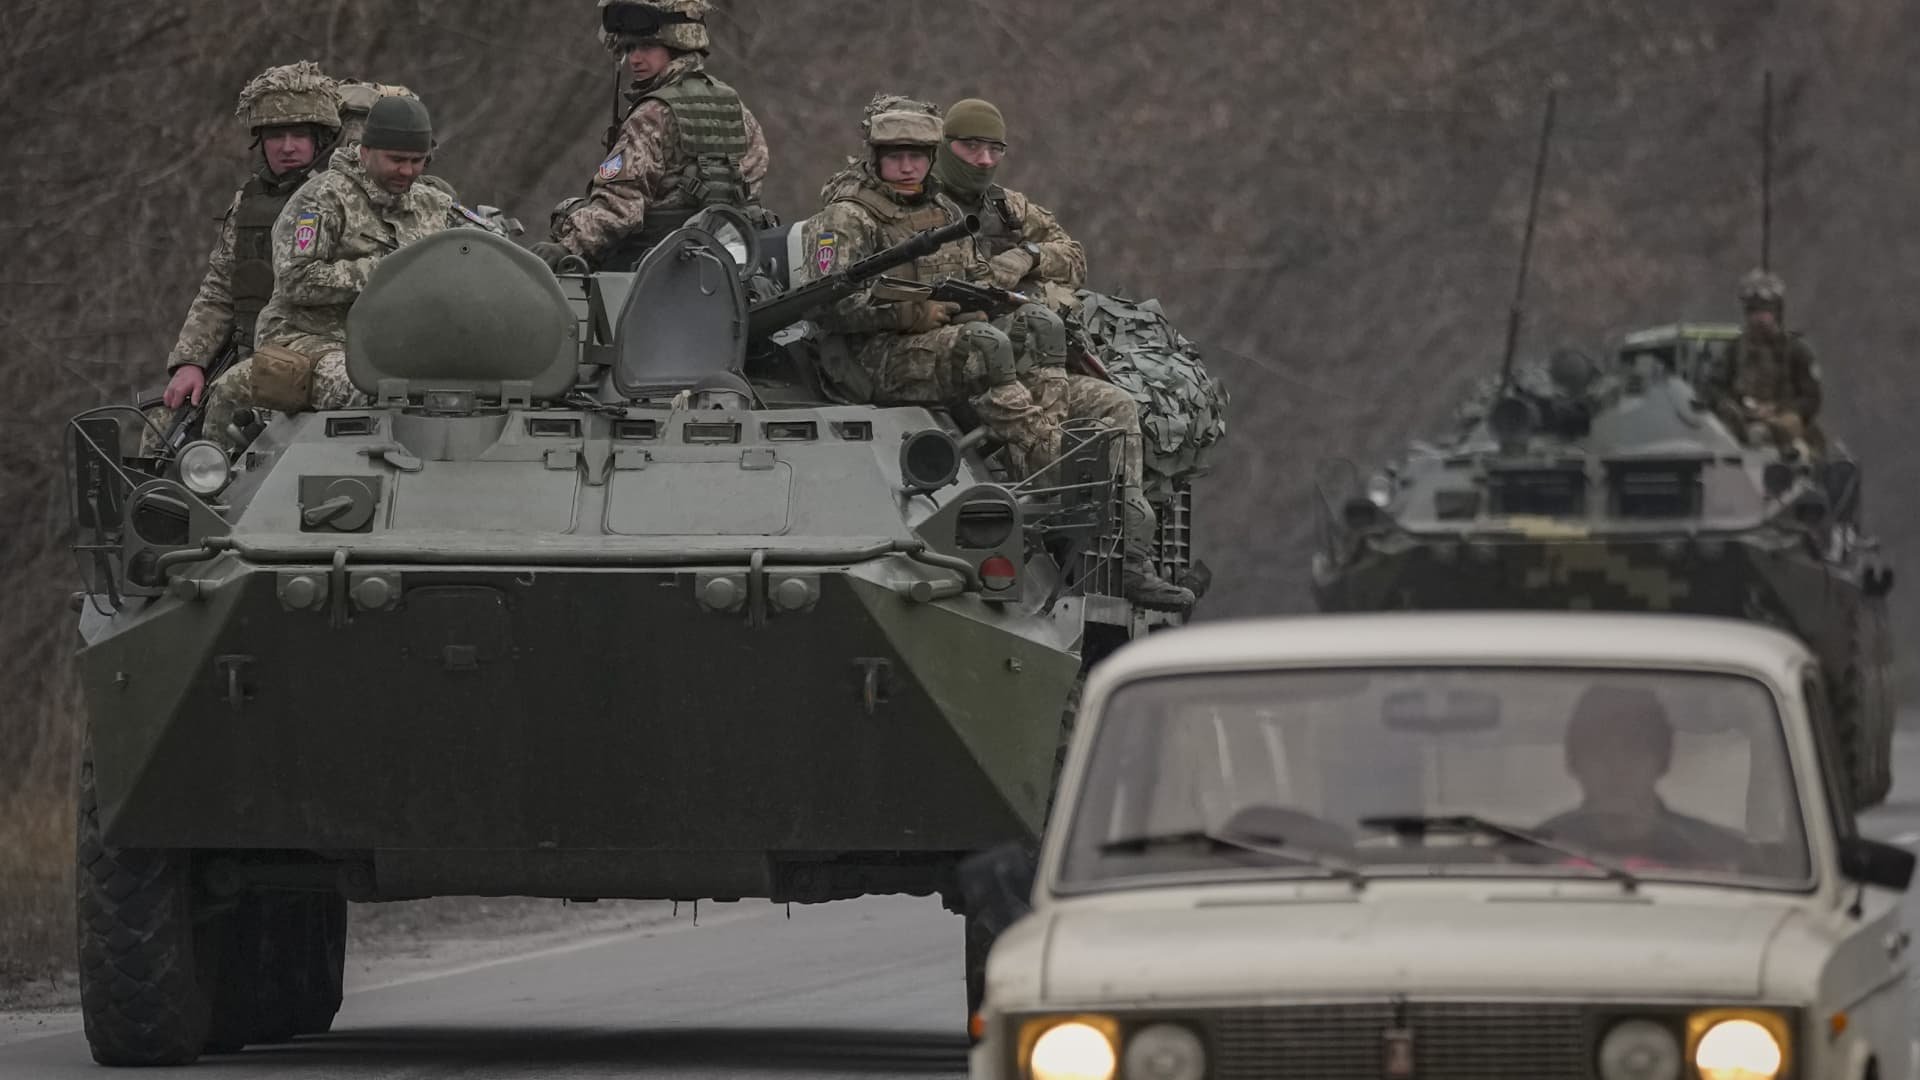 Bitcoin donations to the Ukrainian military are soaring as Russia invades